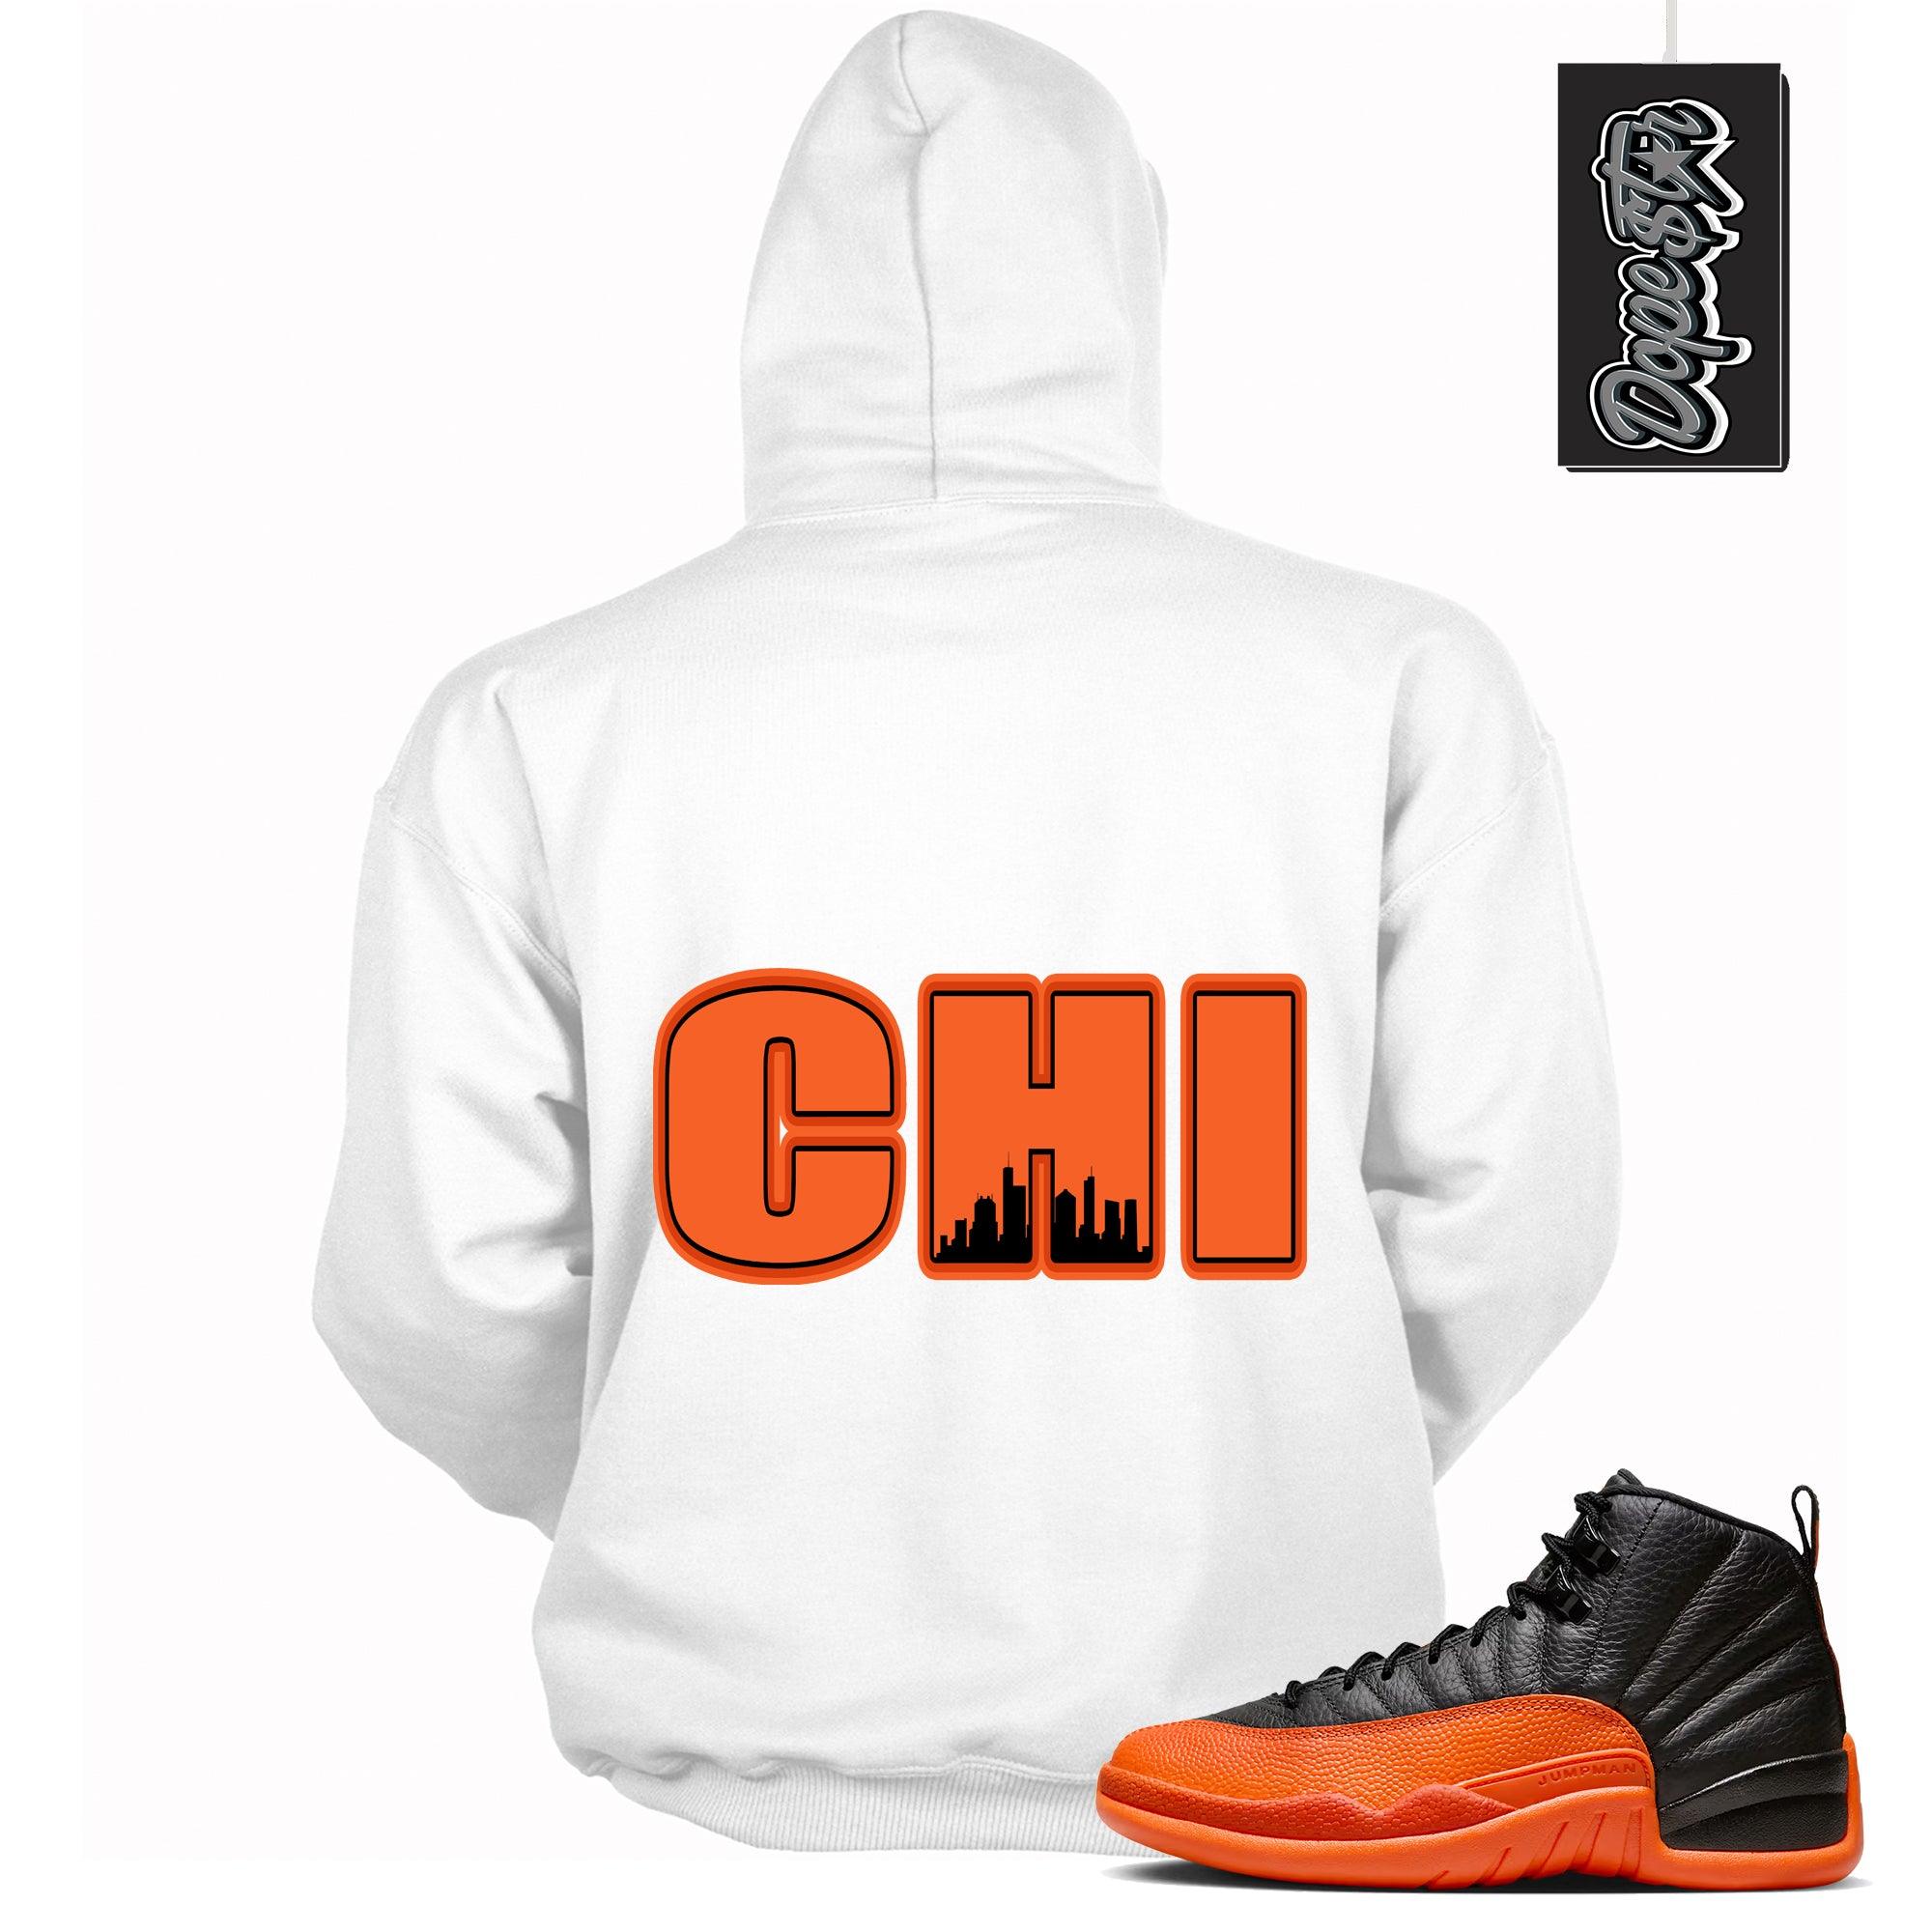 Cool White Graphic Hoodie with “ Chicago “ print, that perfectly matches Air Jordan 12 Retro WNBA All-Star Brilliant Orange  sneakers